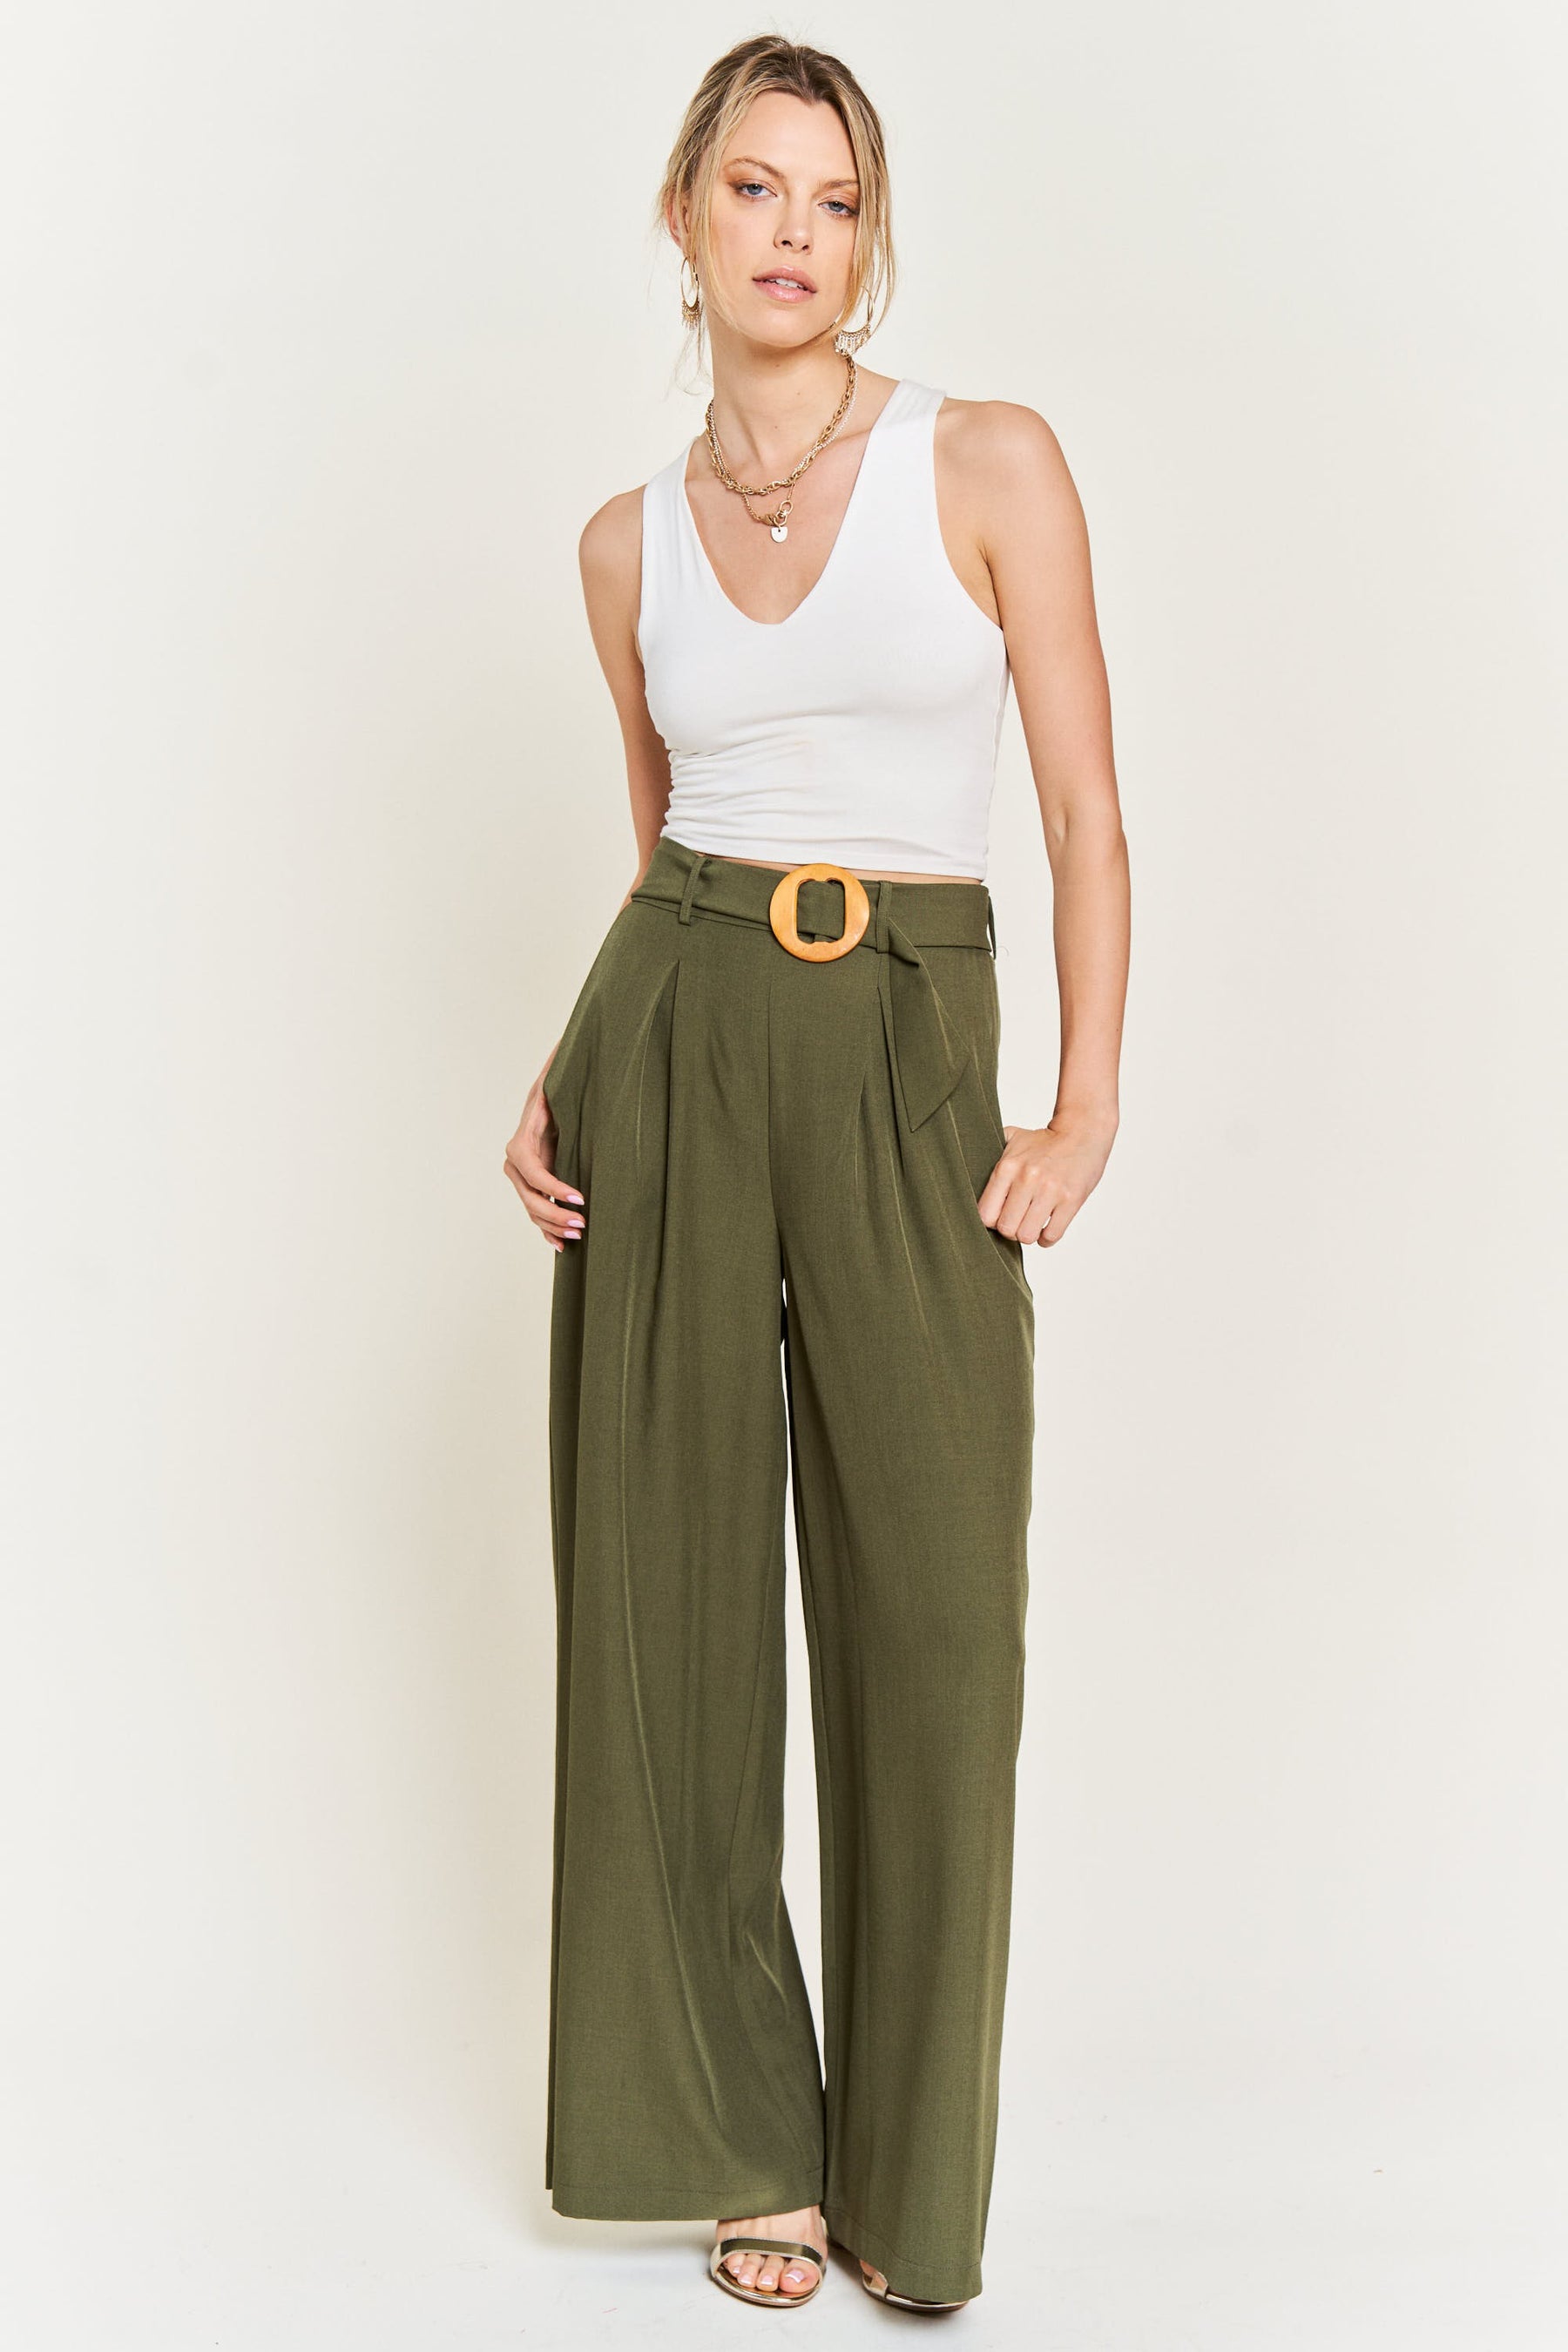 On the Bright Side Belted Pants - Olive